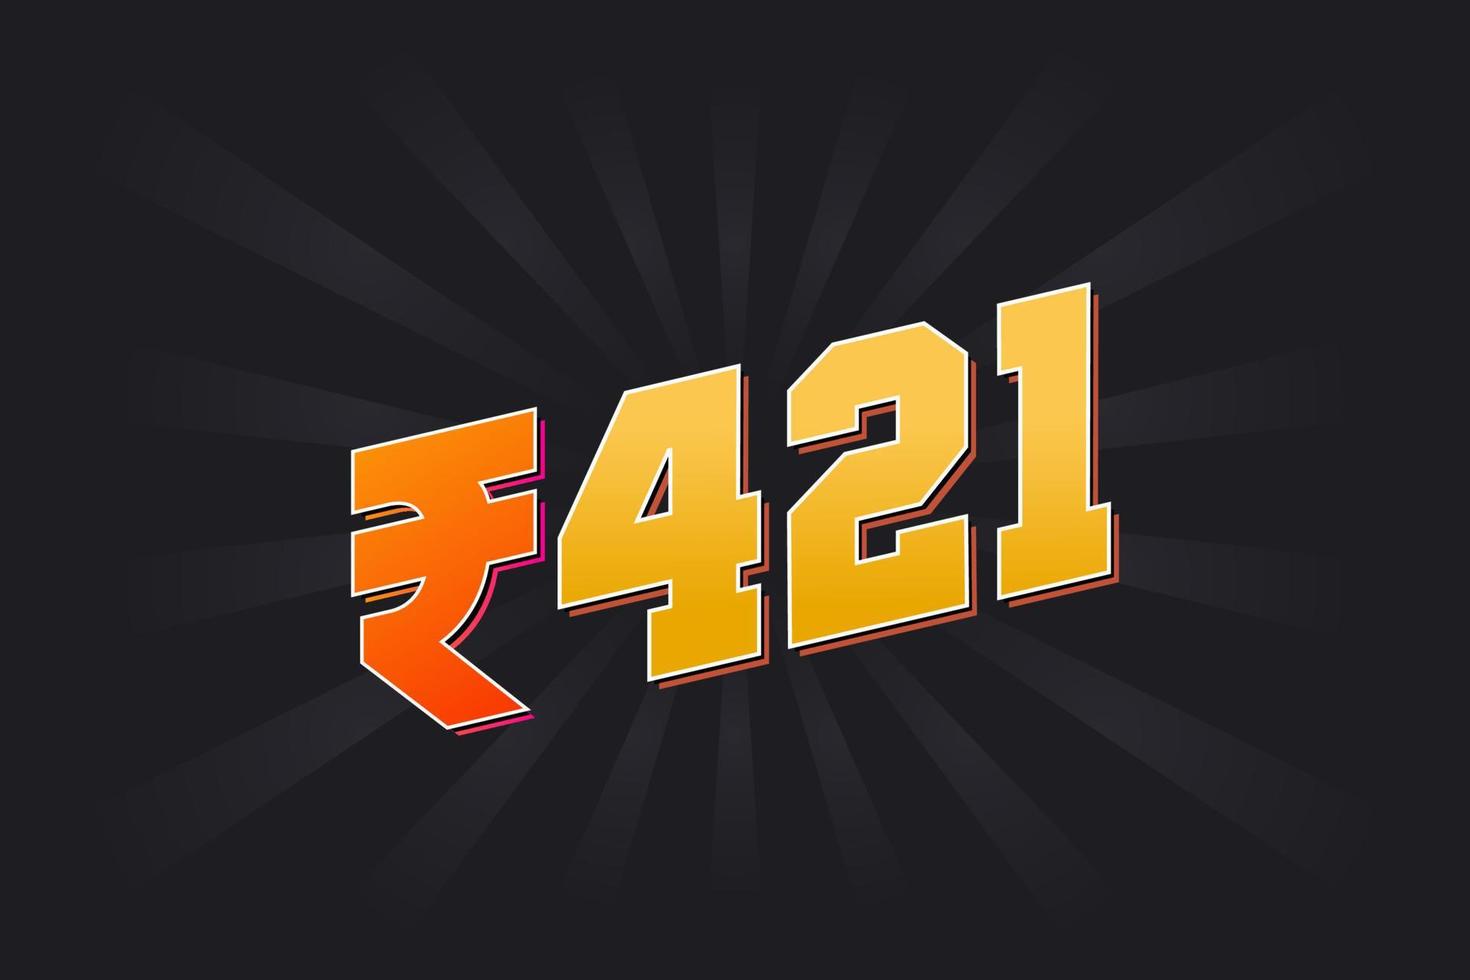 421 Indian Rupee vector currency image. 421 Rupee symbol bold text vector illustration